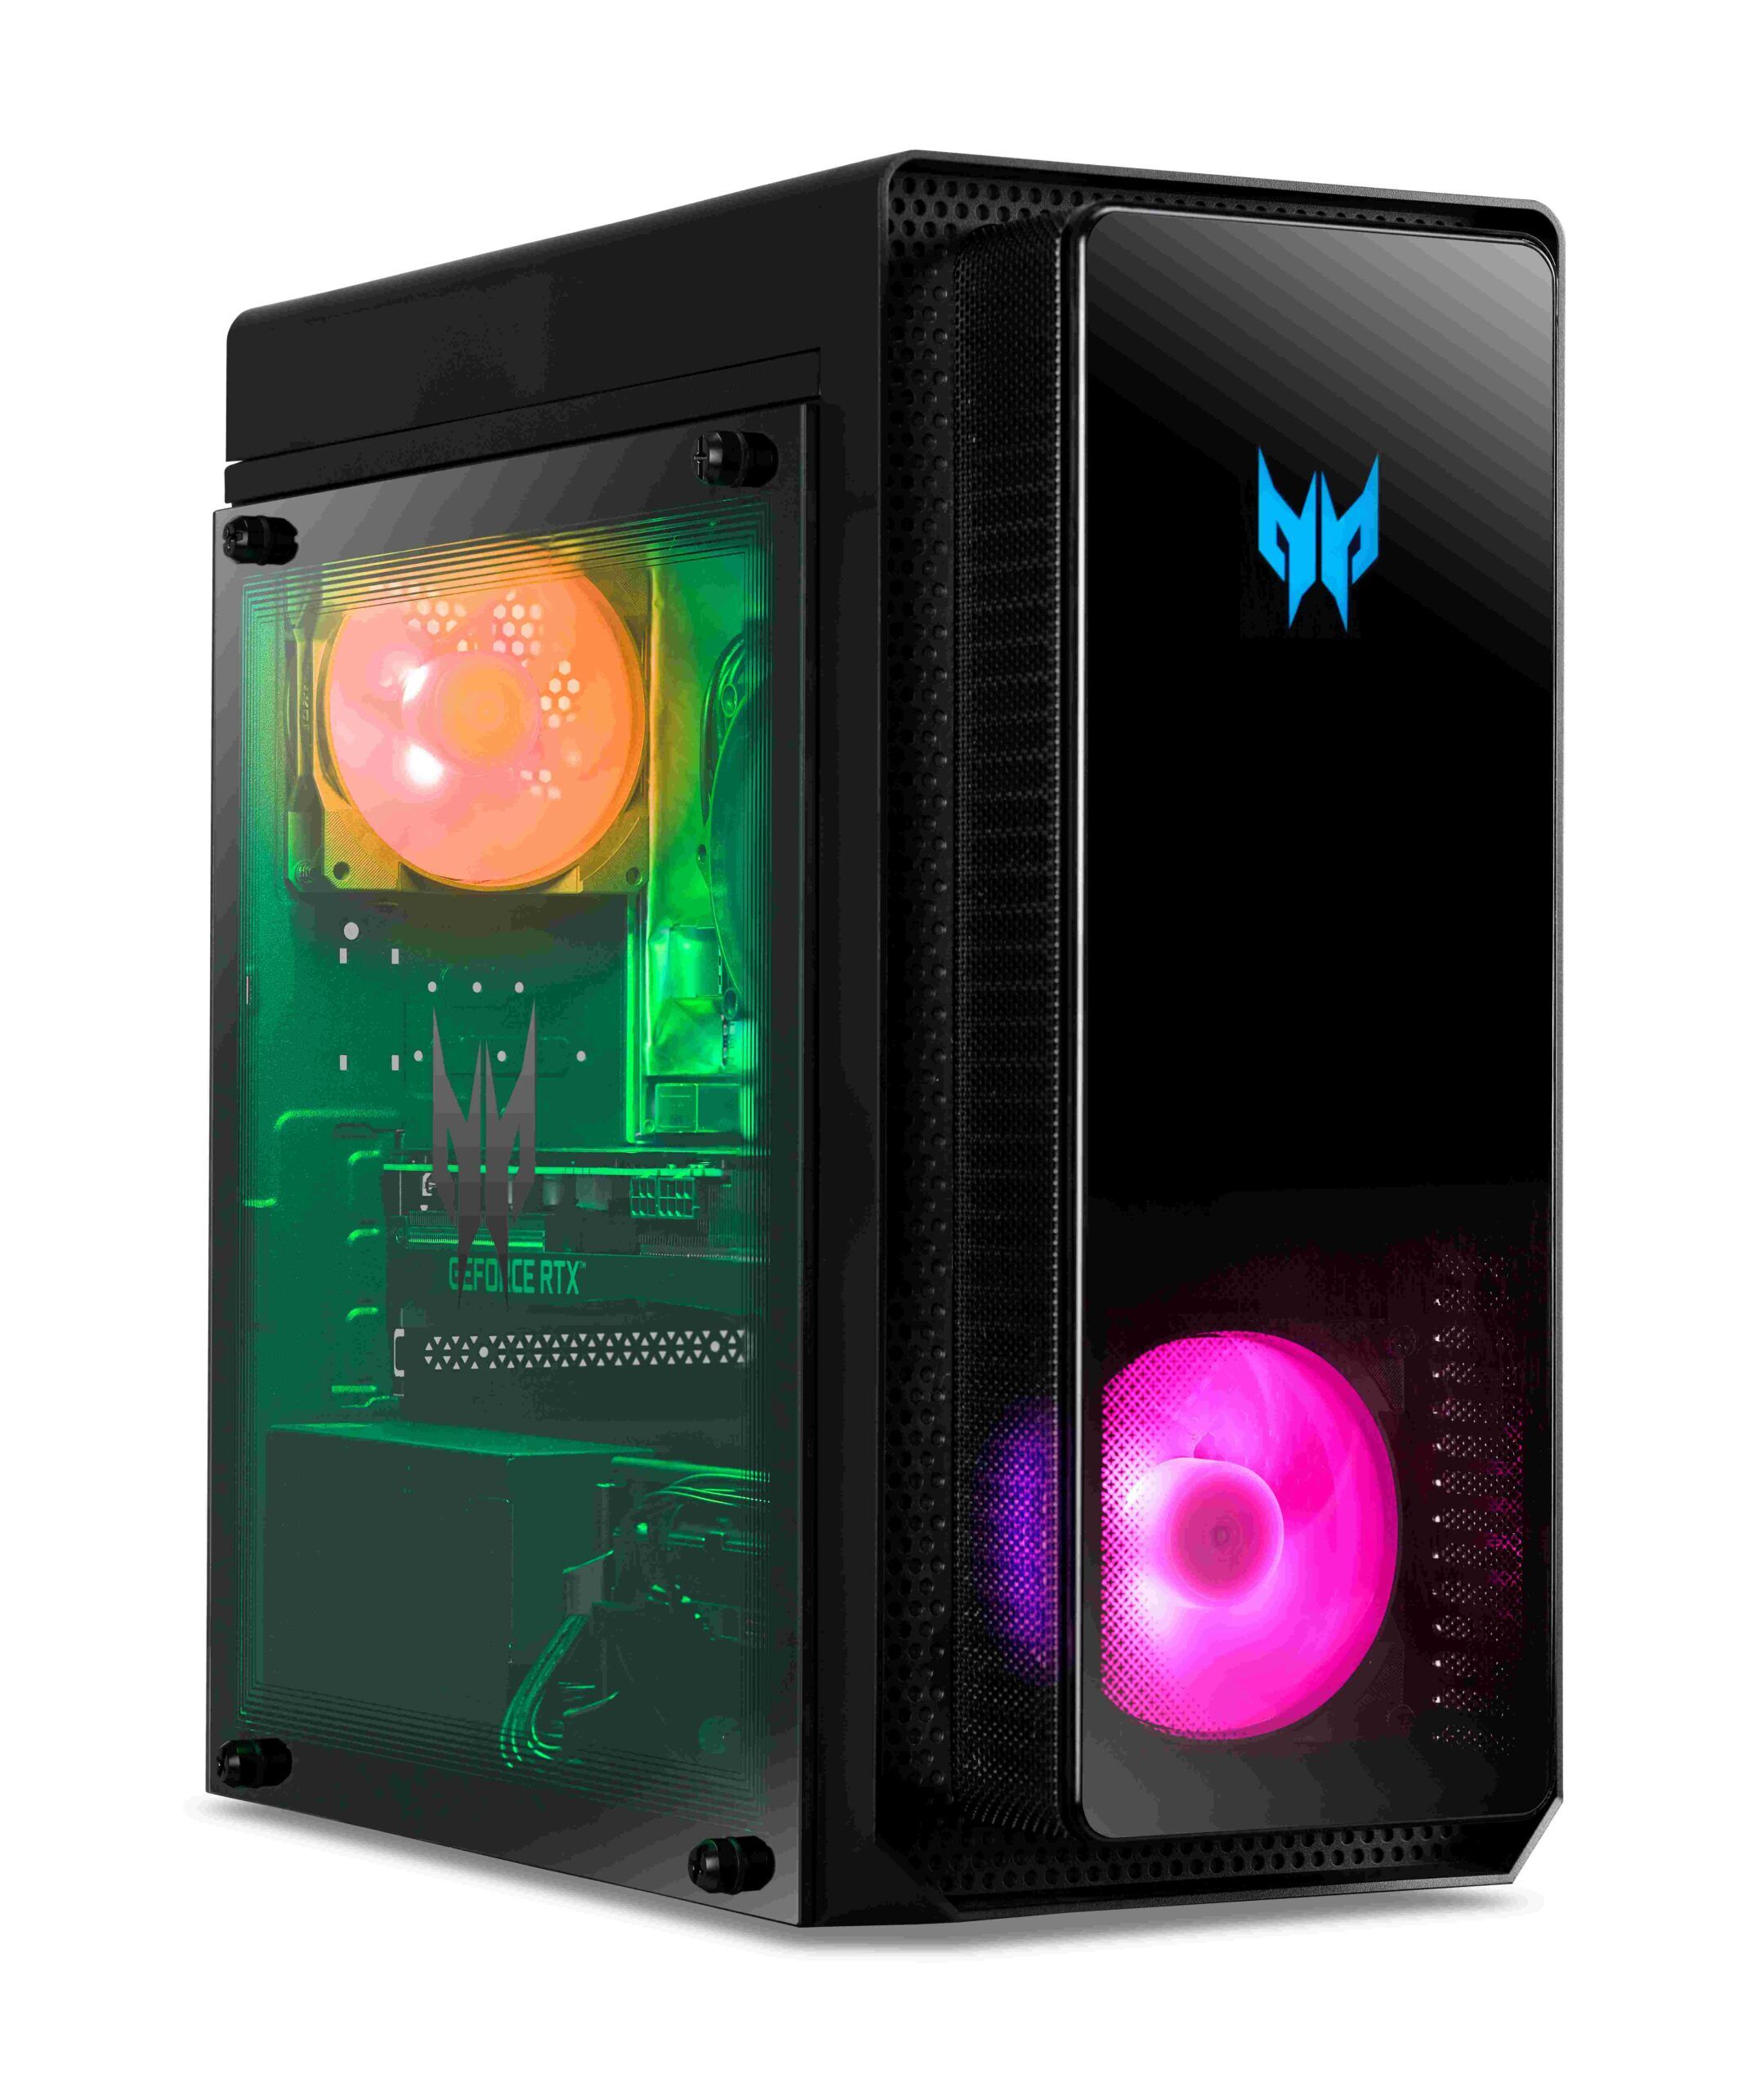 Acer Launched Predator Orion 3000 and Nitro 50 Gaming Desktops